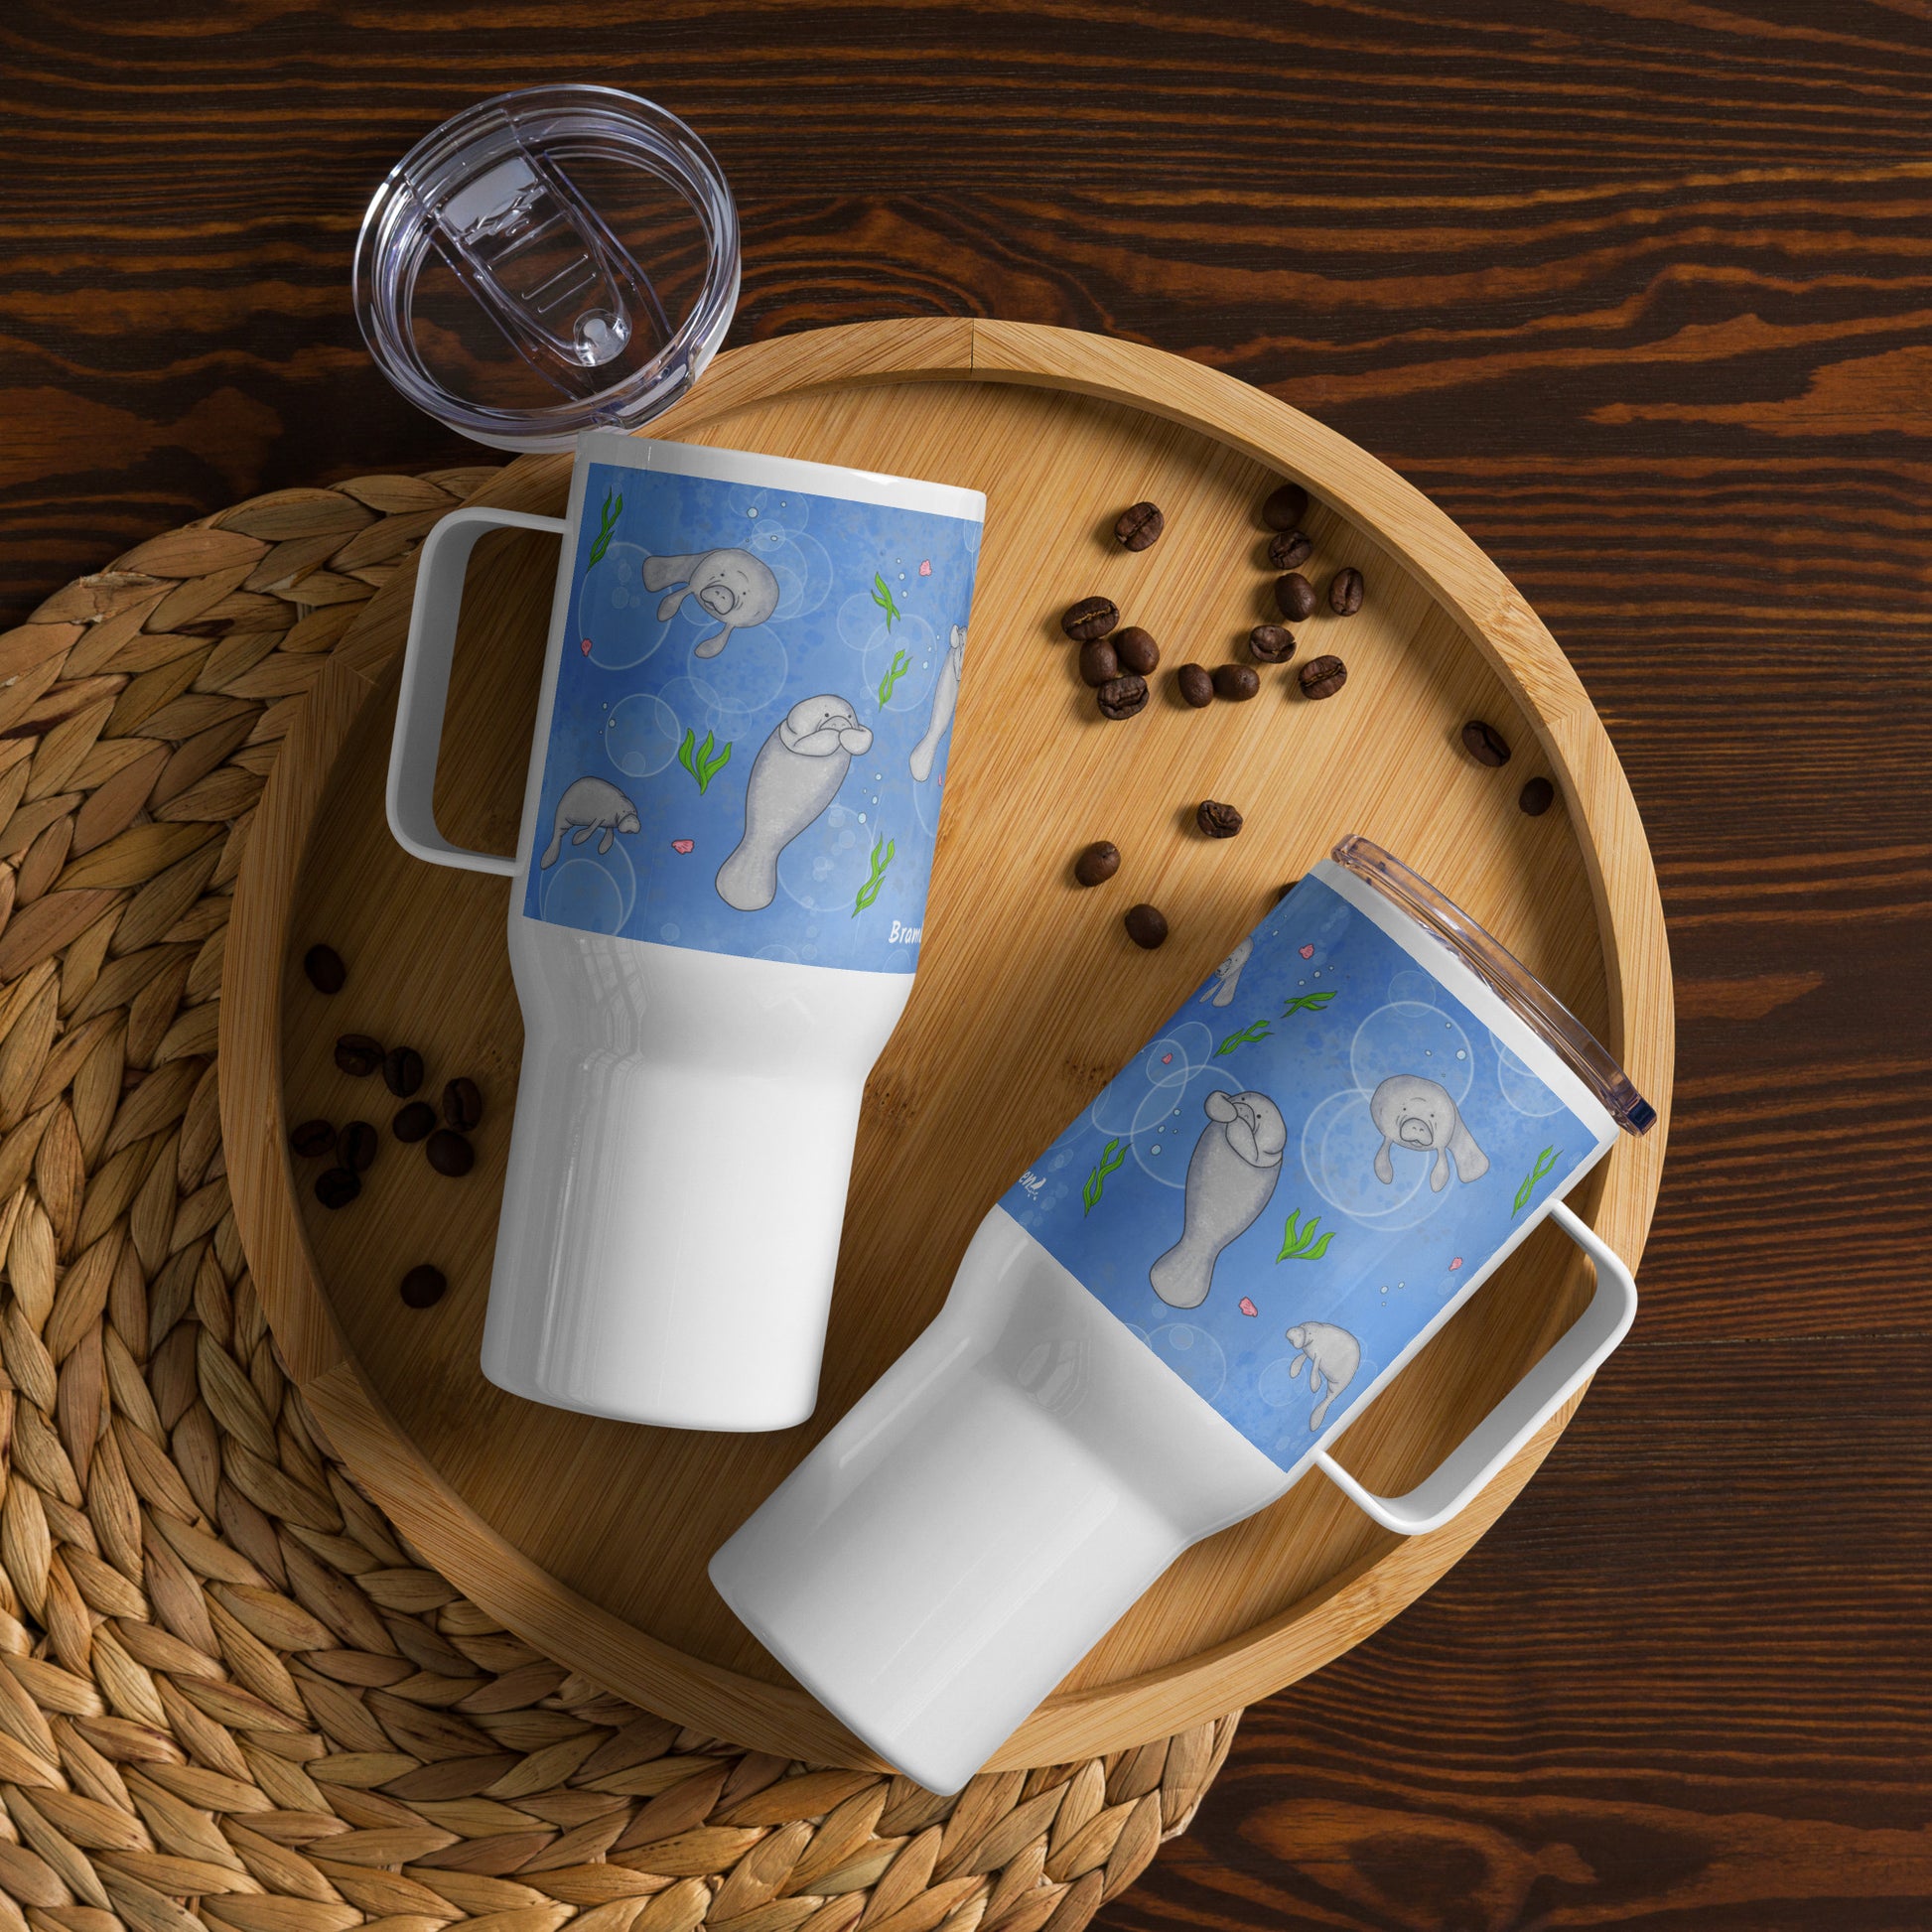 Stainless steel travel mug with handle. Holds 25 ounces of hot or cold drinks. Has wraparound illustrated manatees design. Fits most car cup holders. Comes with spill-proof BPA-free plastic lid. Image shows two mugs on wooden serving tray by coffee beans.